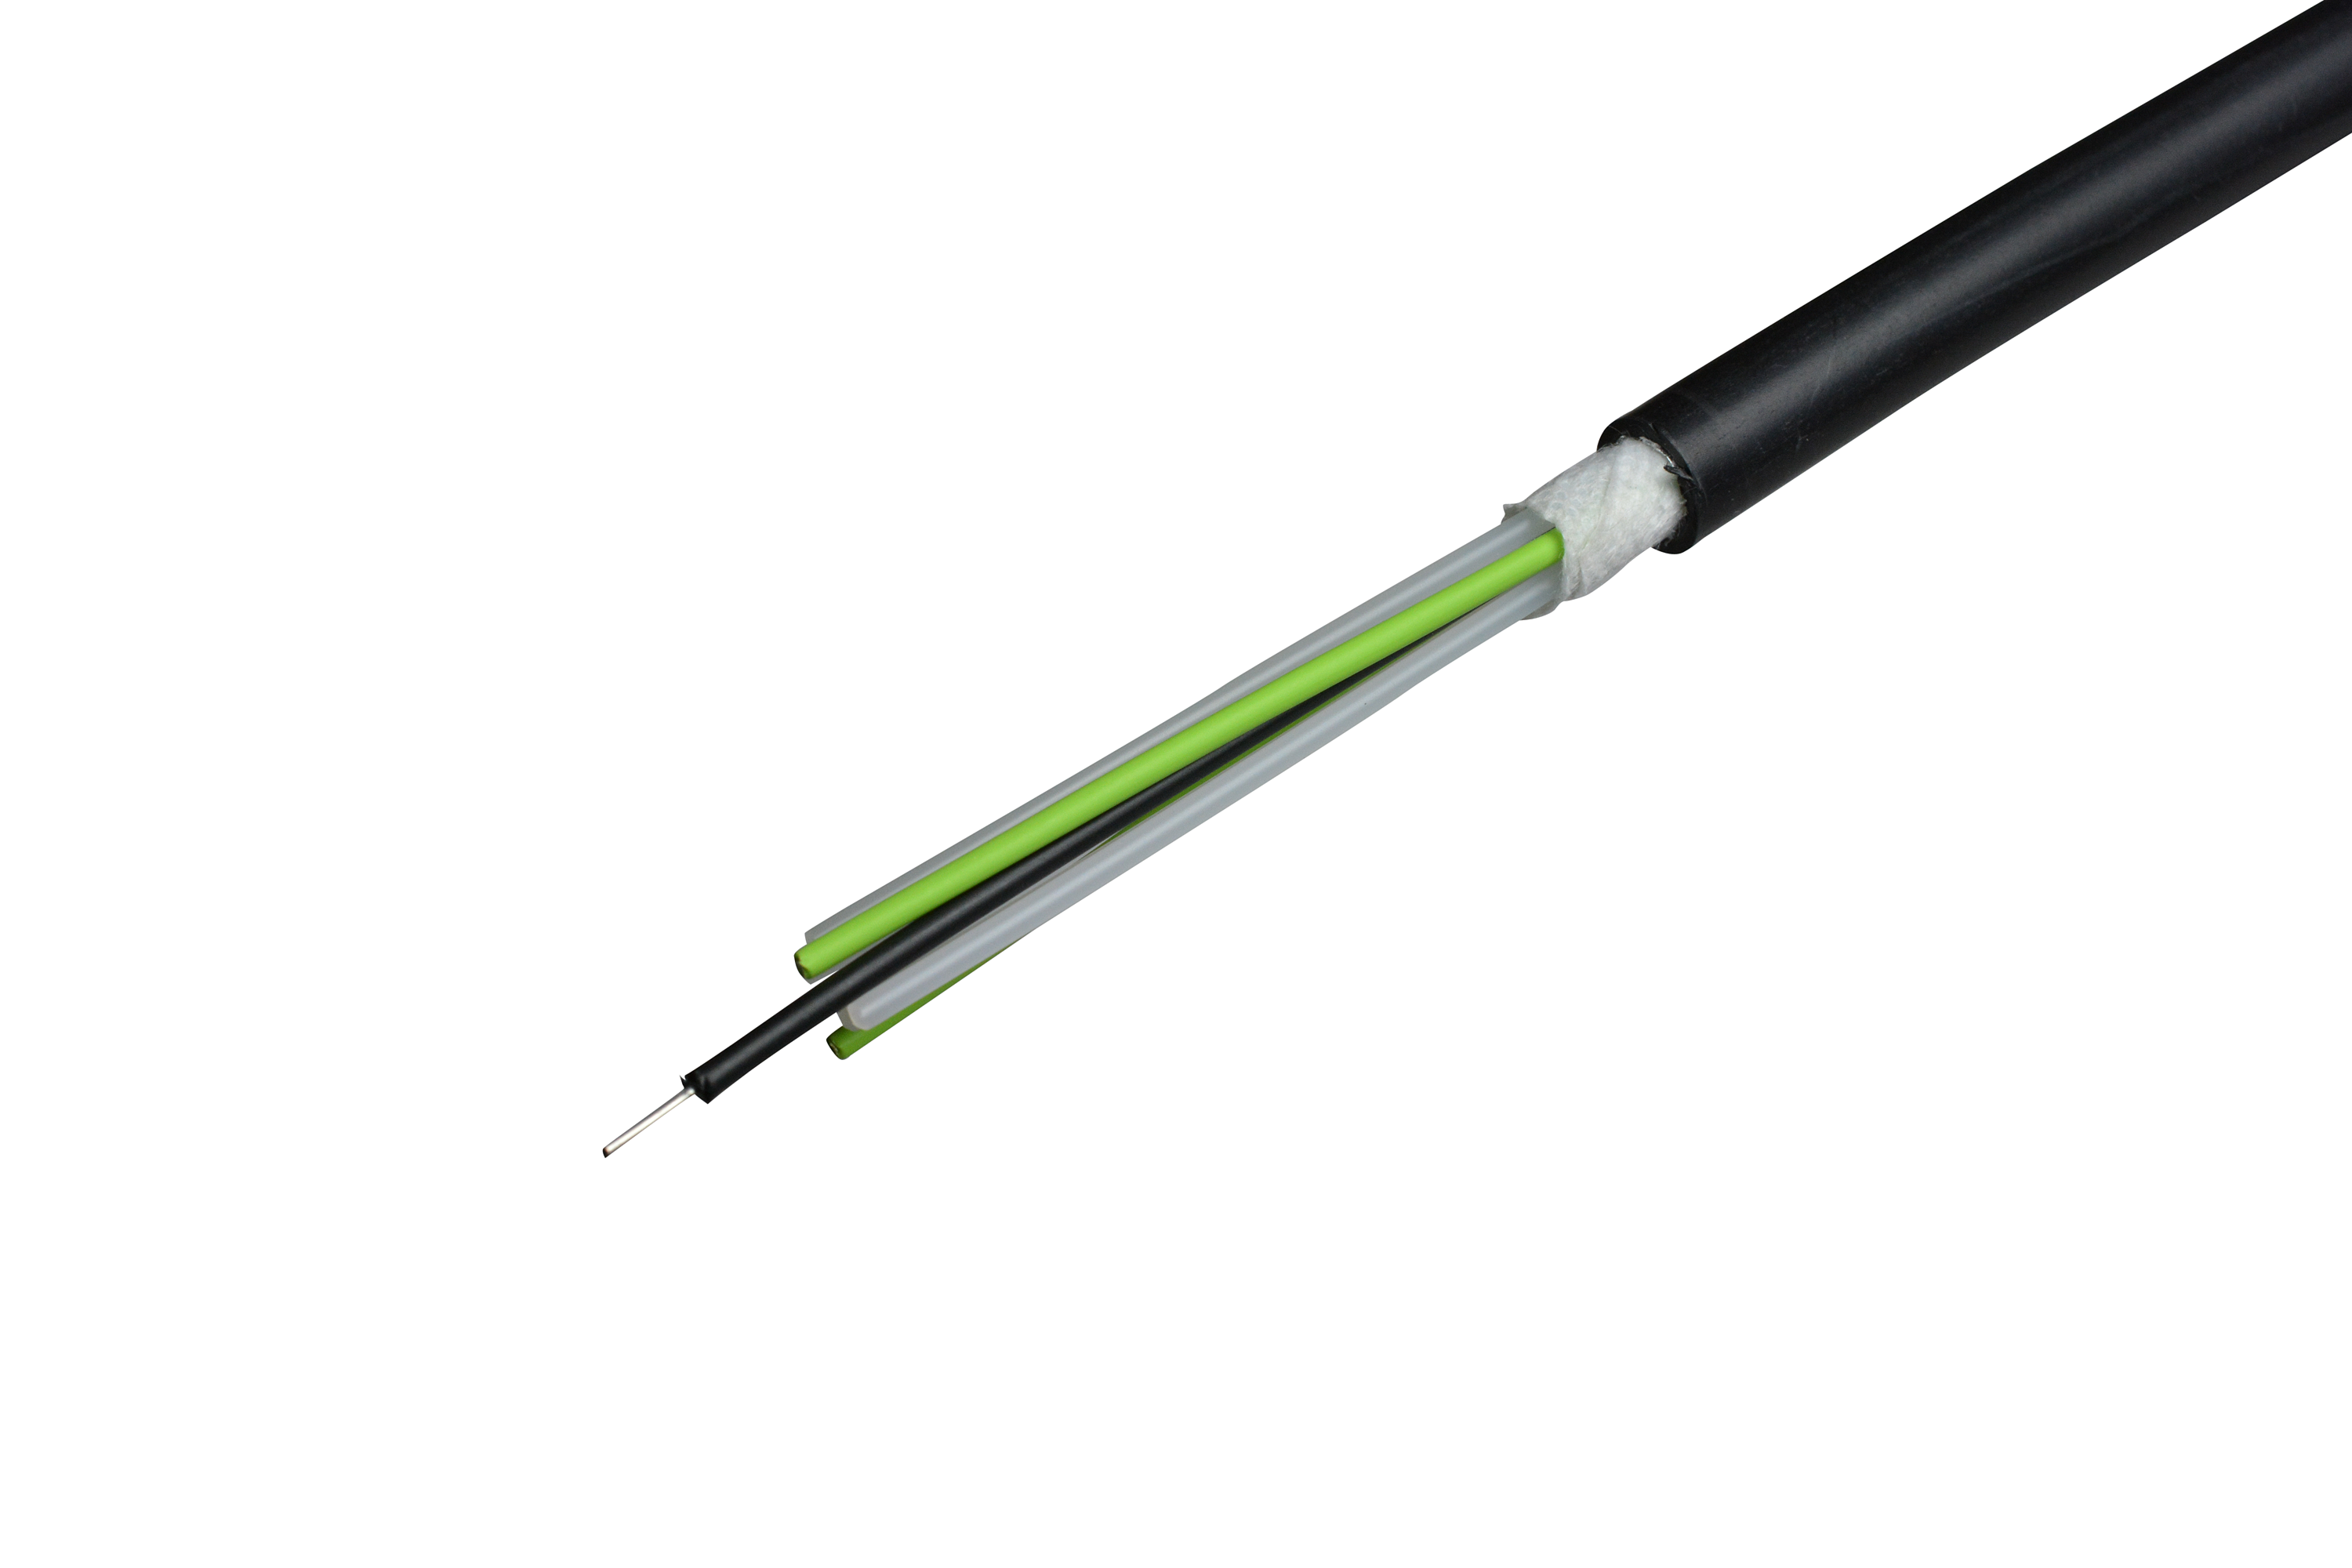 2cores,OM3,Unitized Round Type Fiber Optic Cable for Indoor and OutdoorUse.